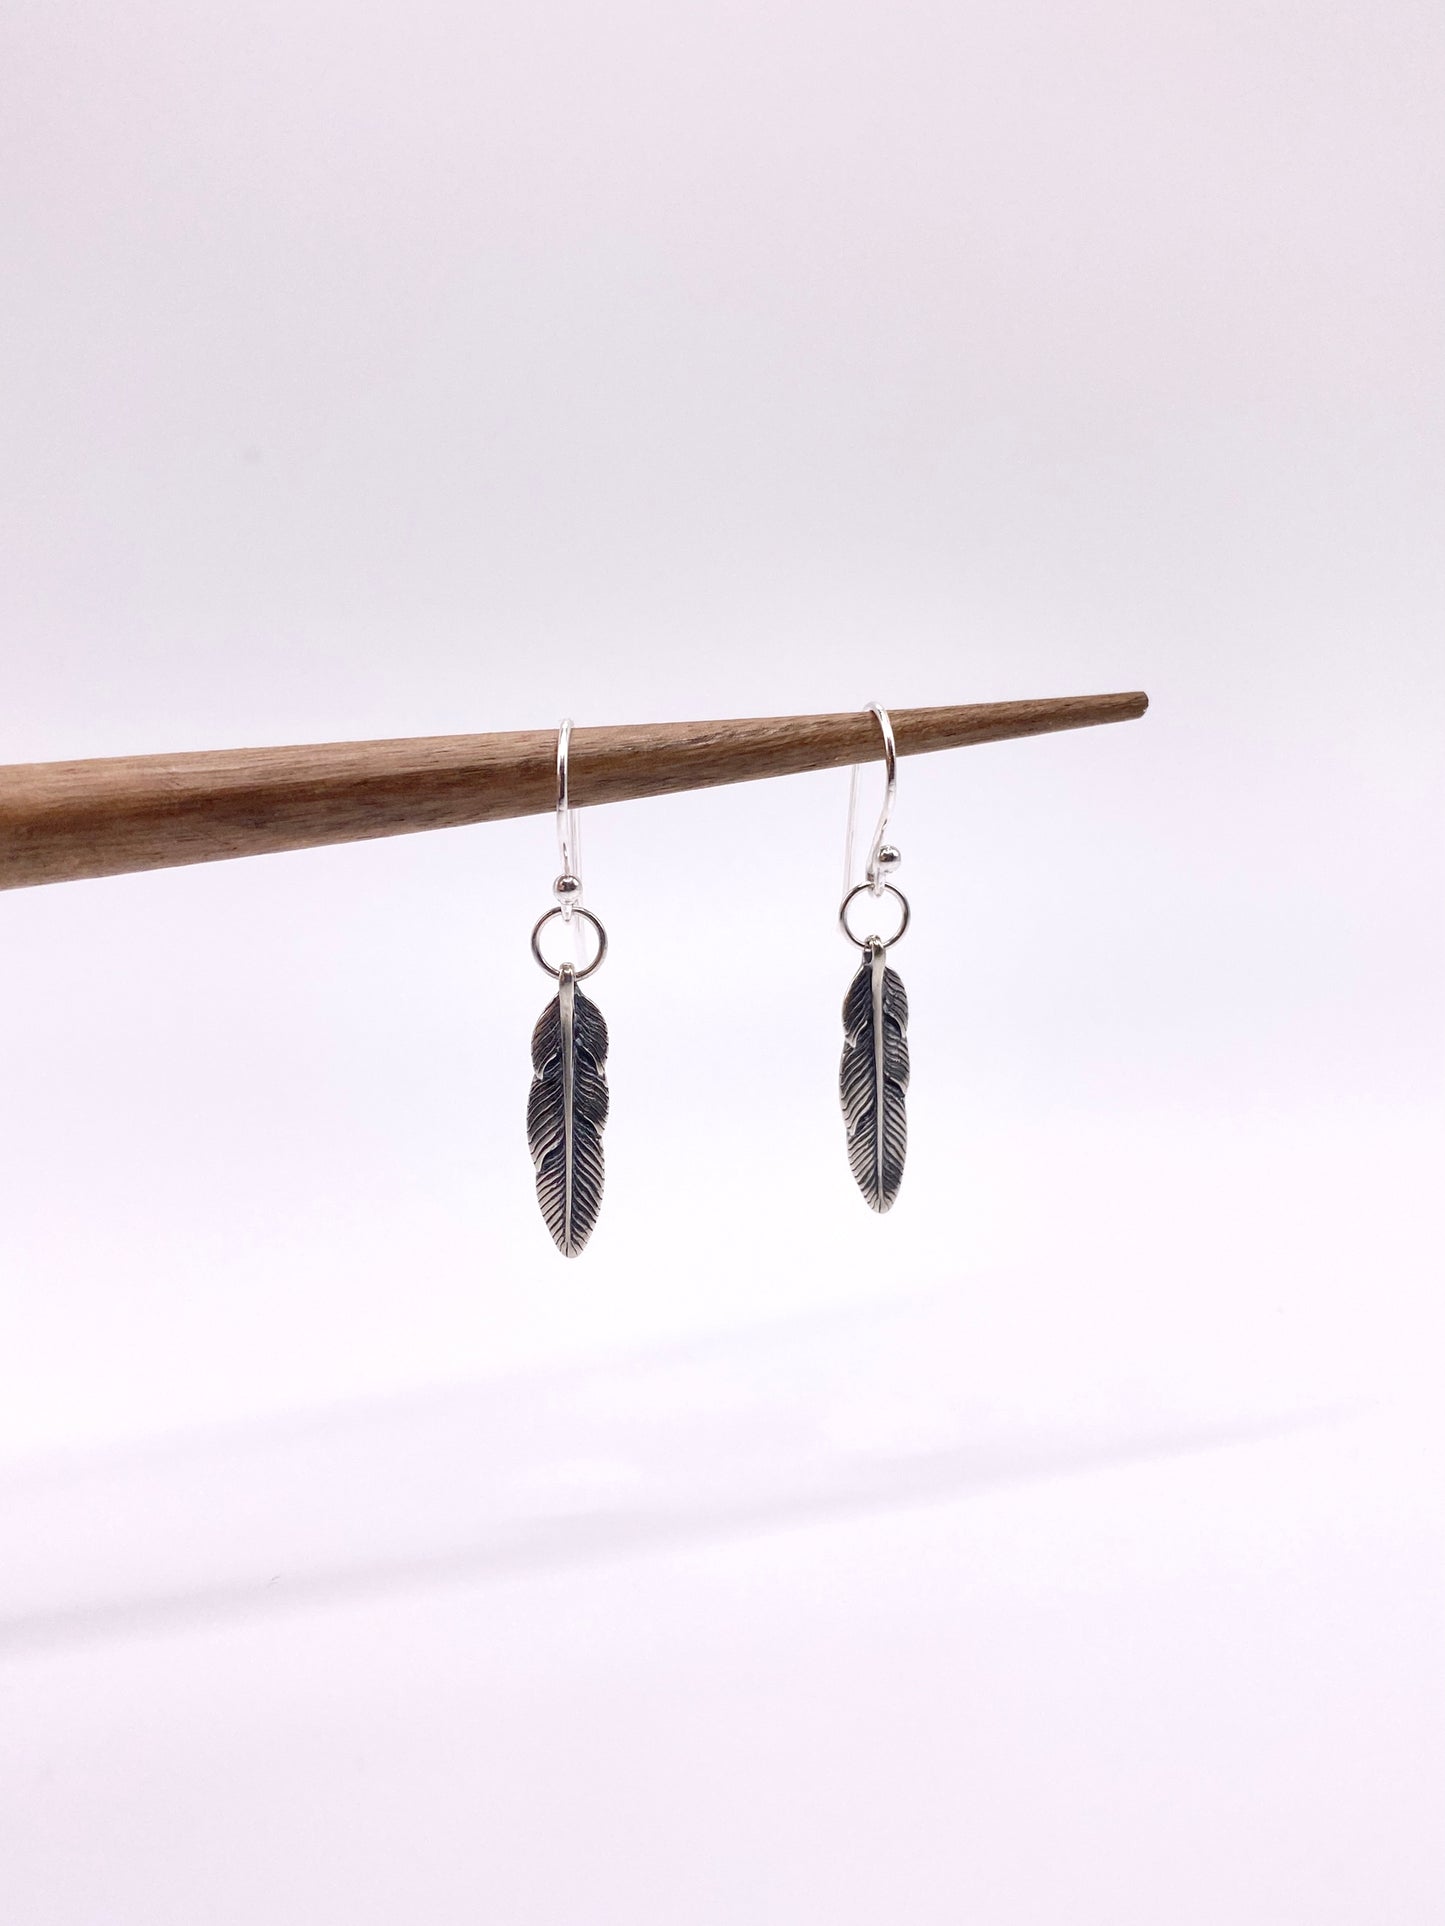 Feather Charm Earrings in .925 Sterling Silver